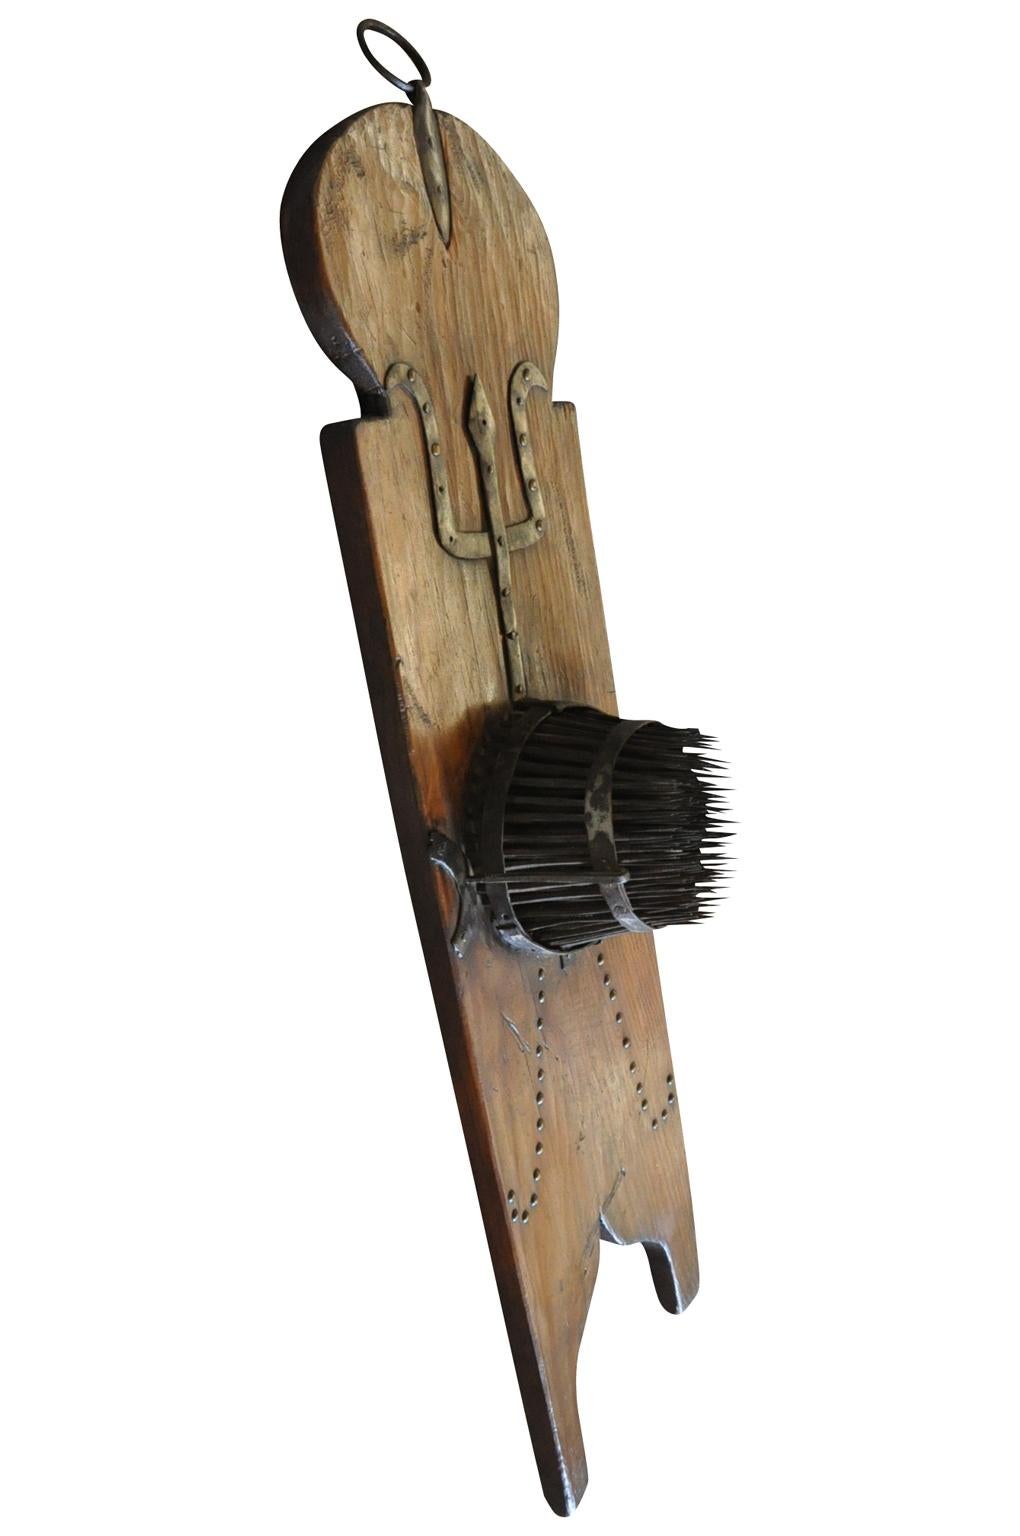 A very charming and unusual mid-19th century Apparatus for combing wool. A terrific decorative accent piece for a rustic environment.